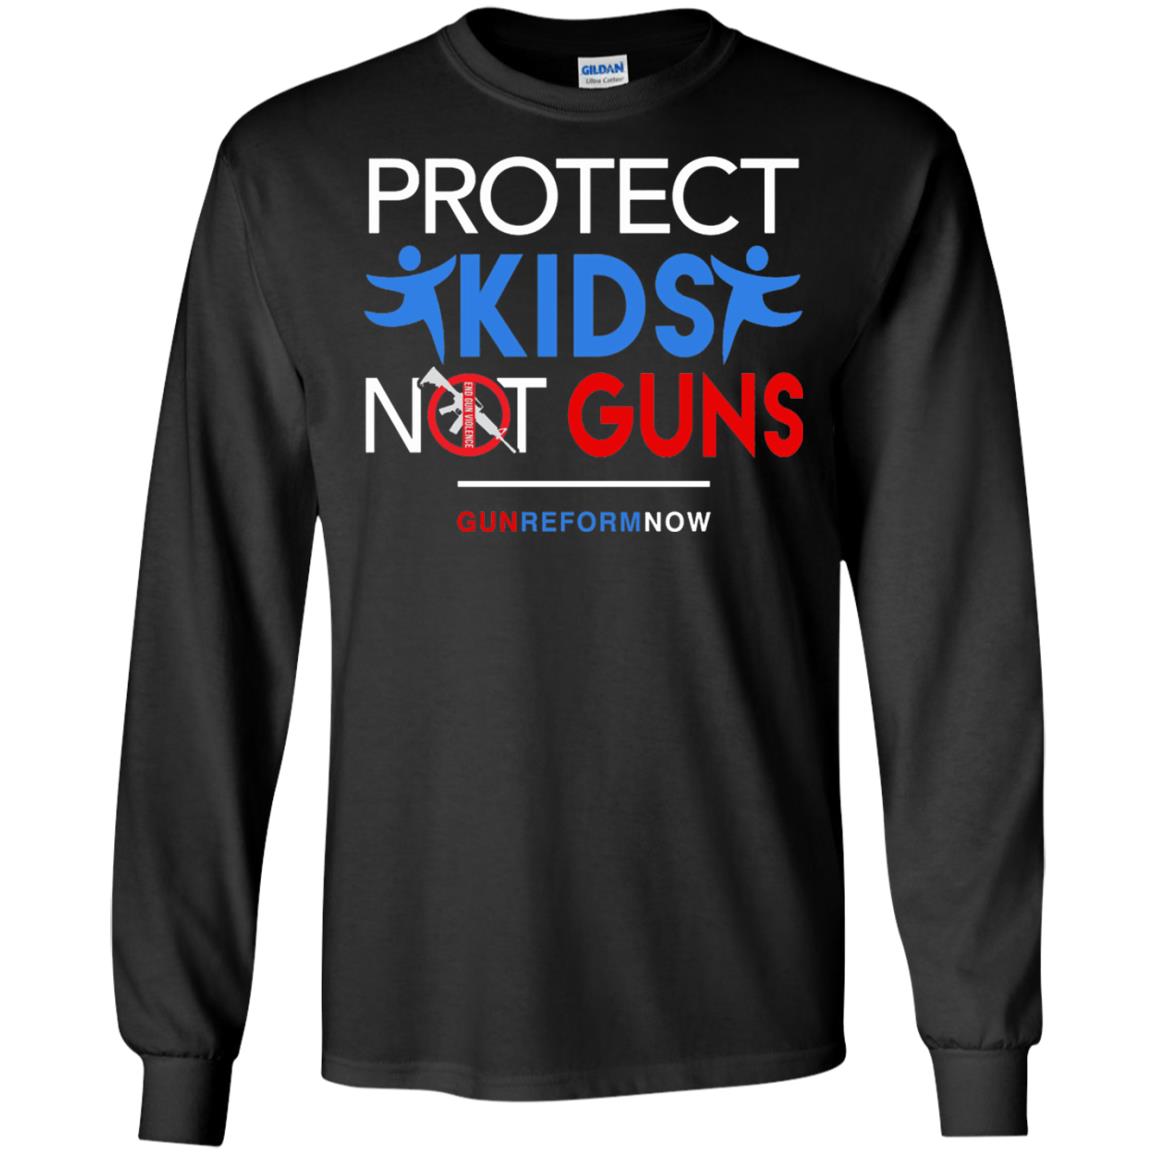 Protect Our Kids Not Guns March For Action T-shirt